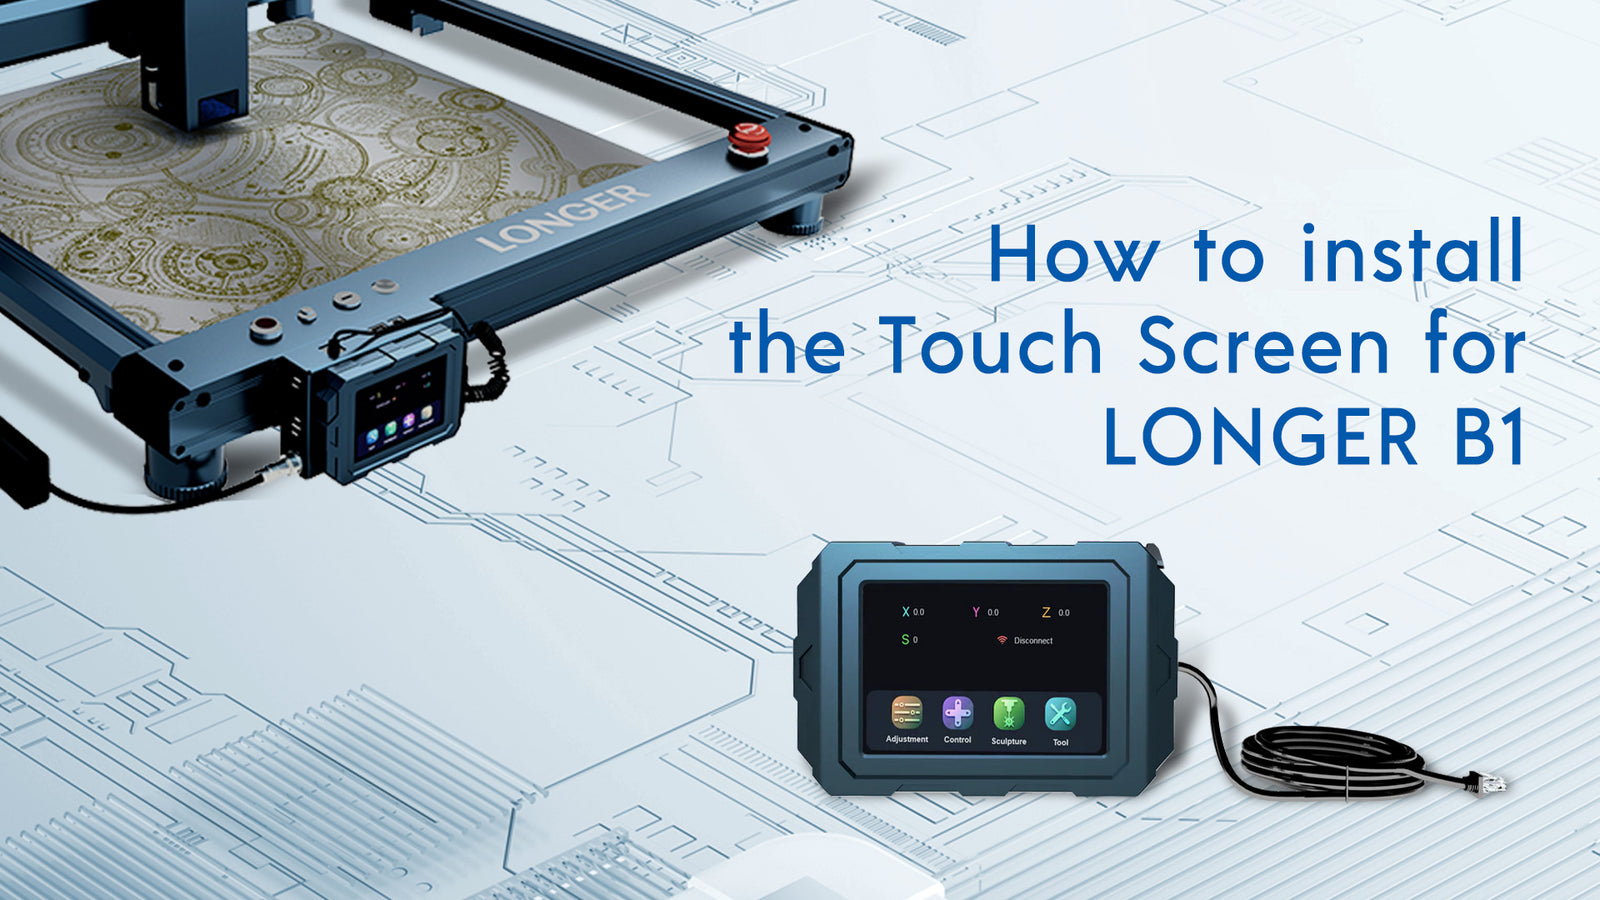 How to install the Touch Screen for Longer B1